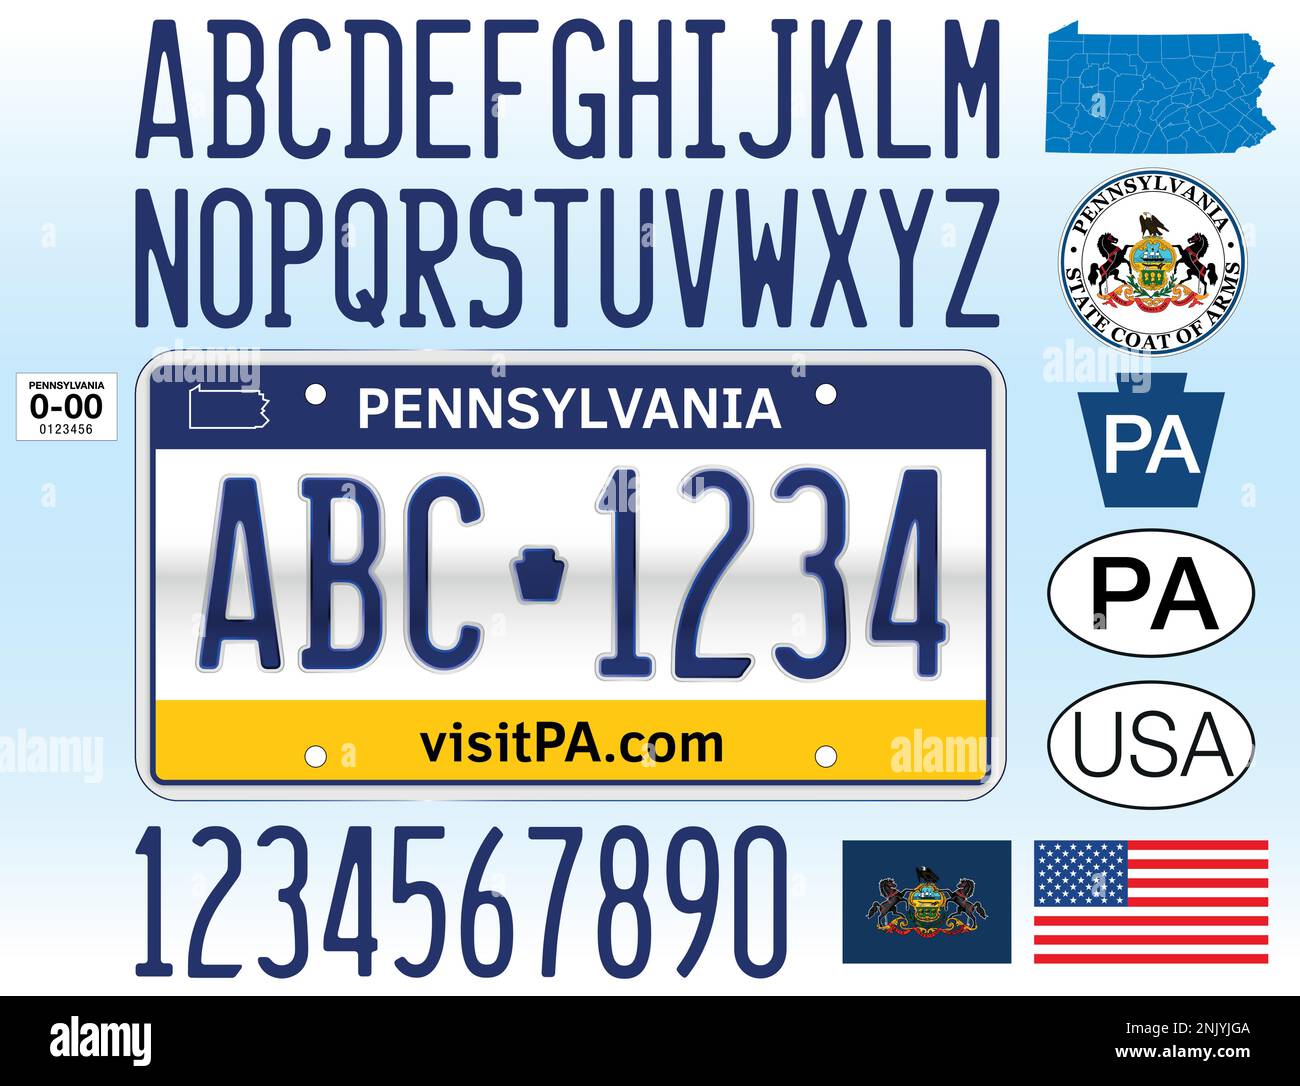 Pennsylvania US State car license plate pattern, letters, numbers and symbols, vector illustration, United States Stock Vector